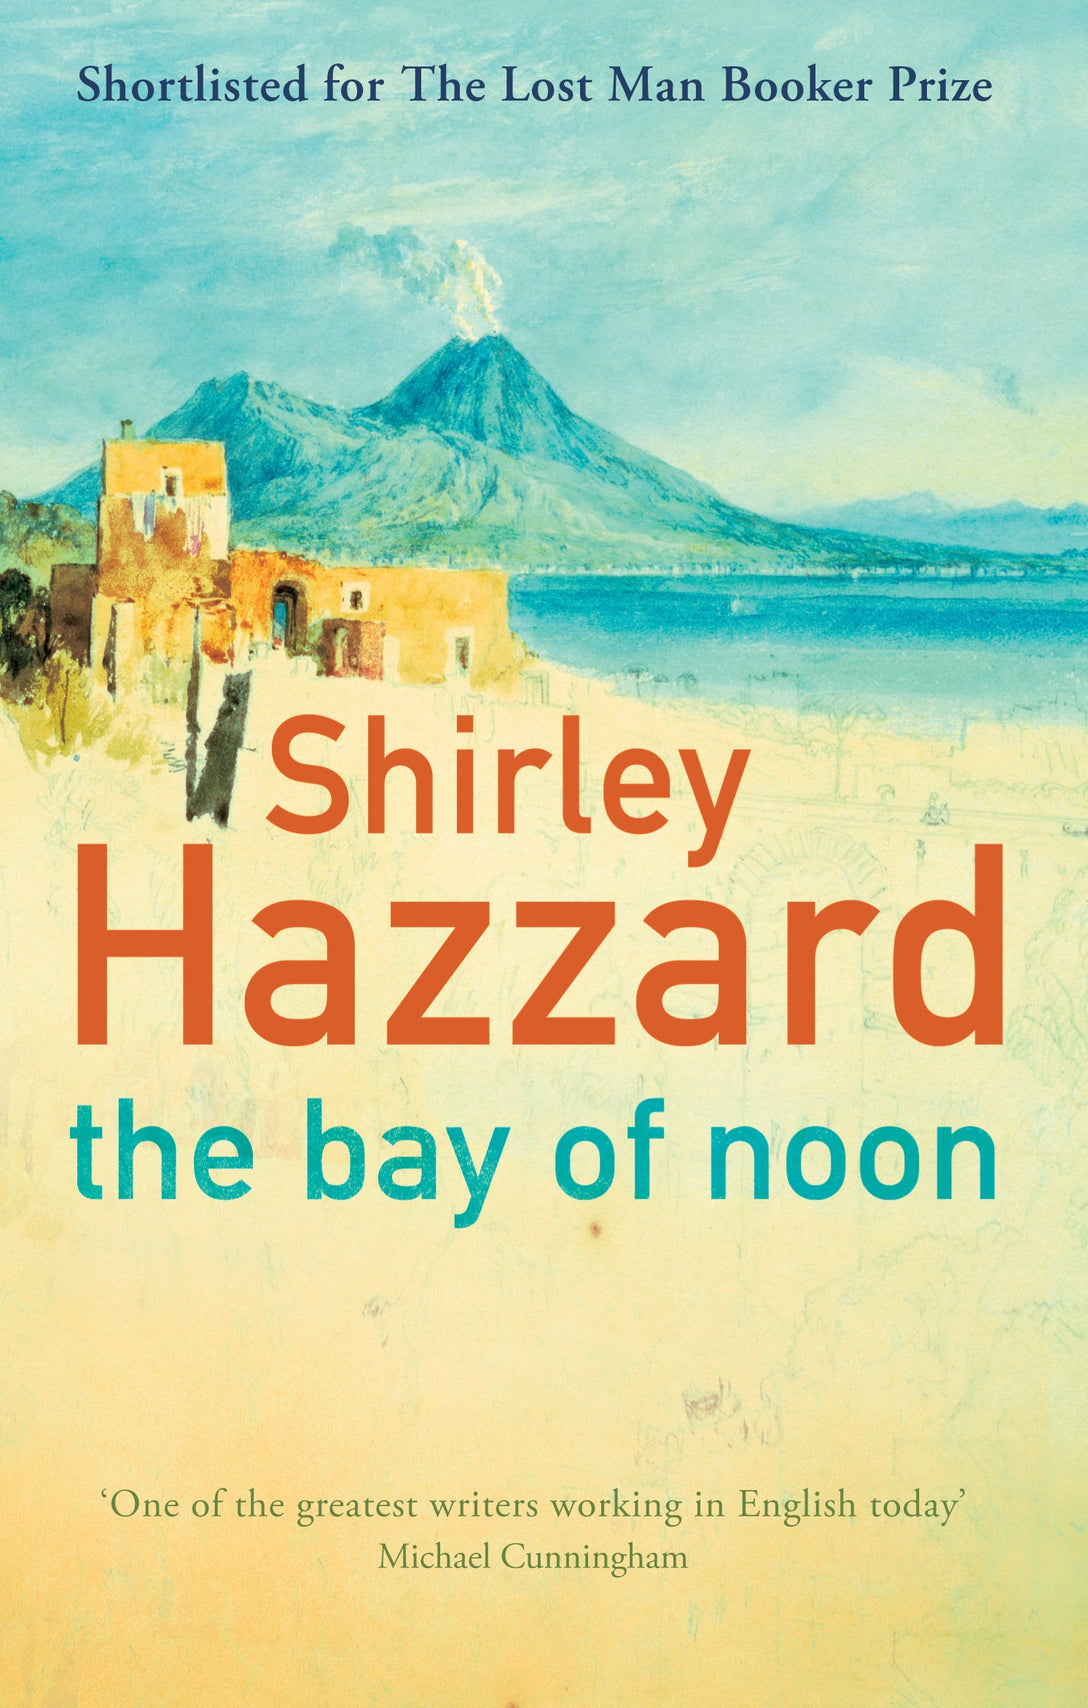 The Bay Of Noon by Shirley Hazzard